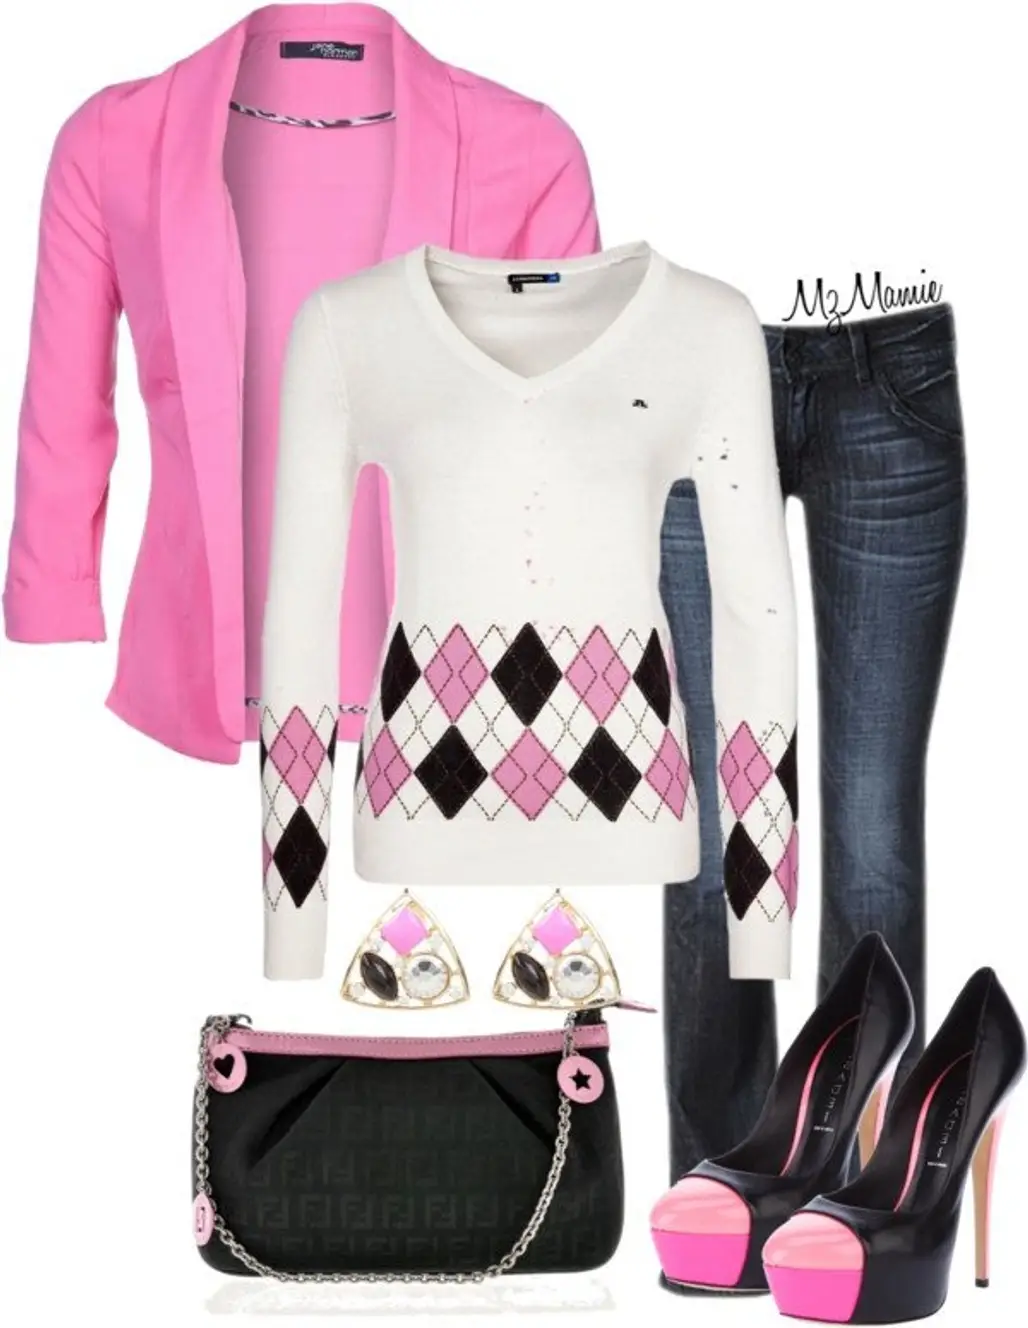 clothing,pink,sleeve,outerwear,product,